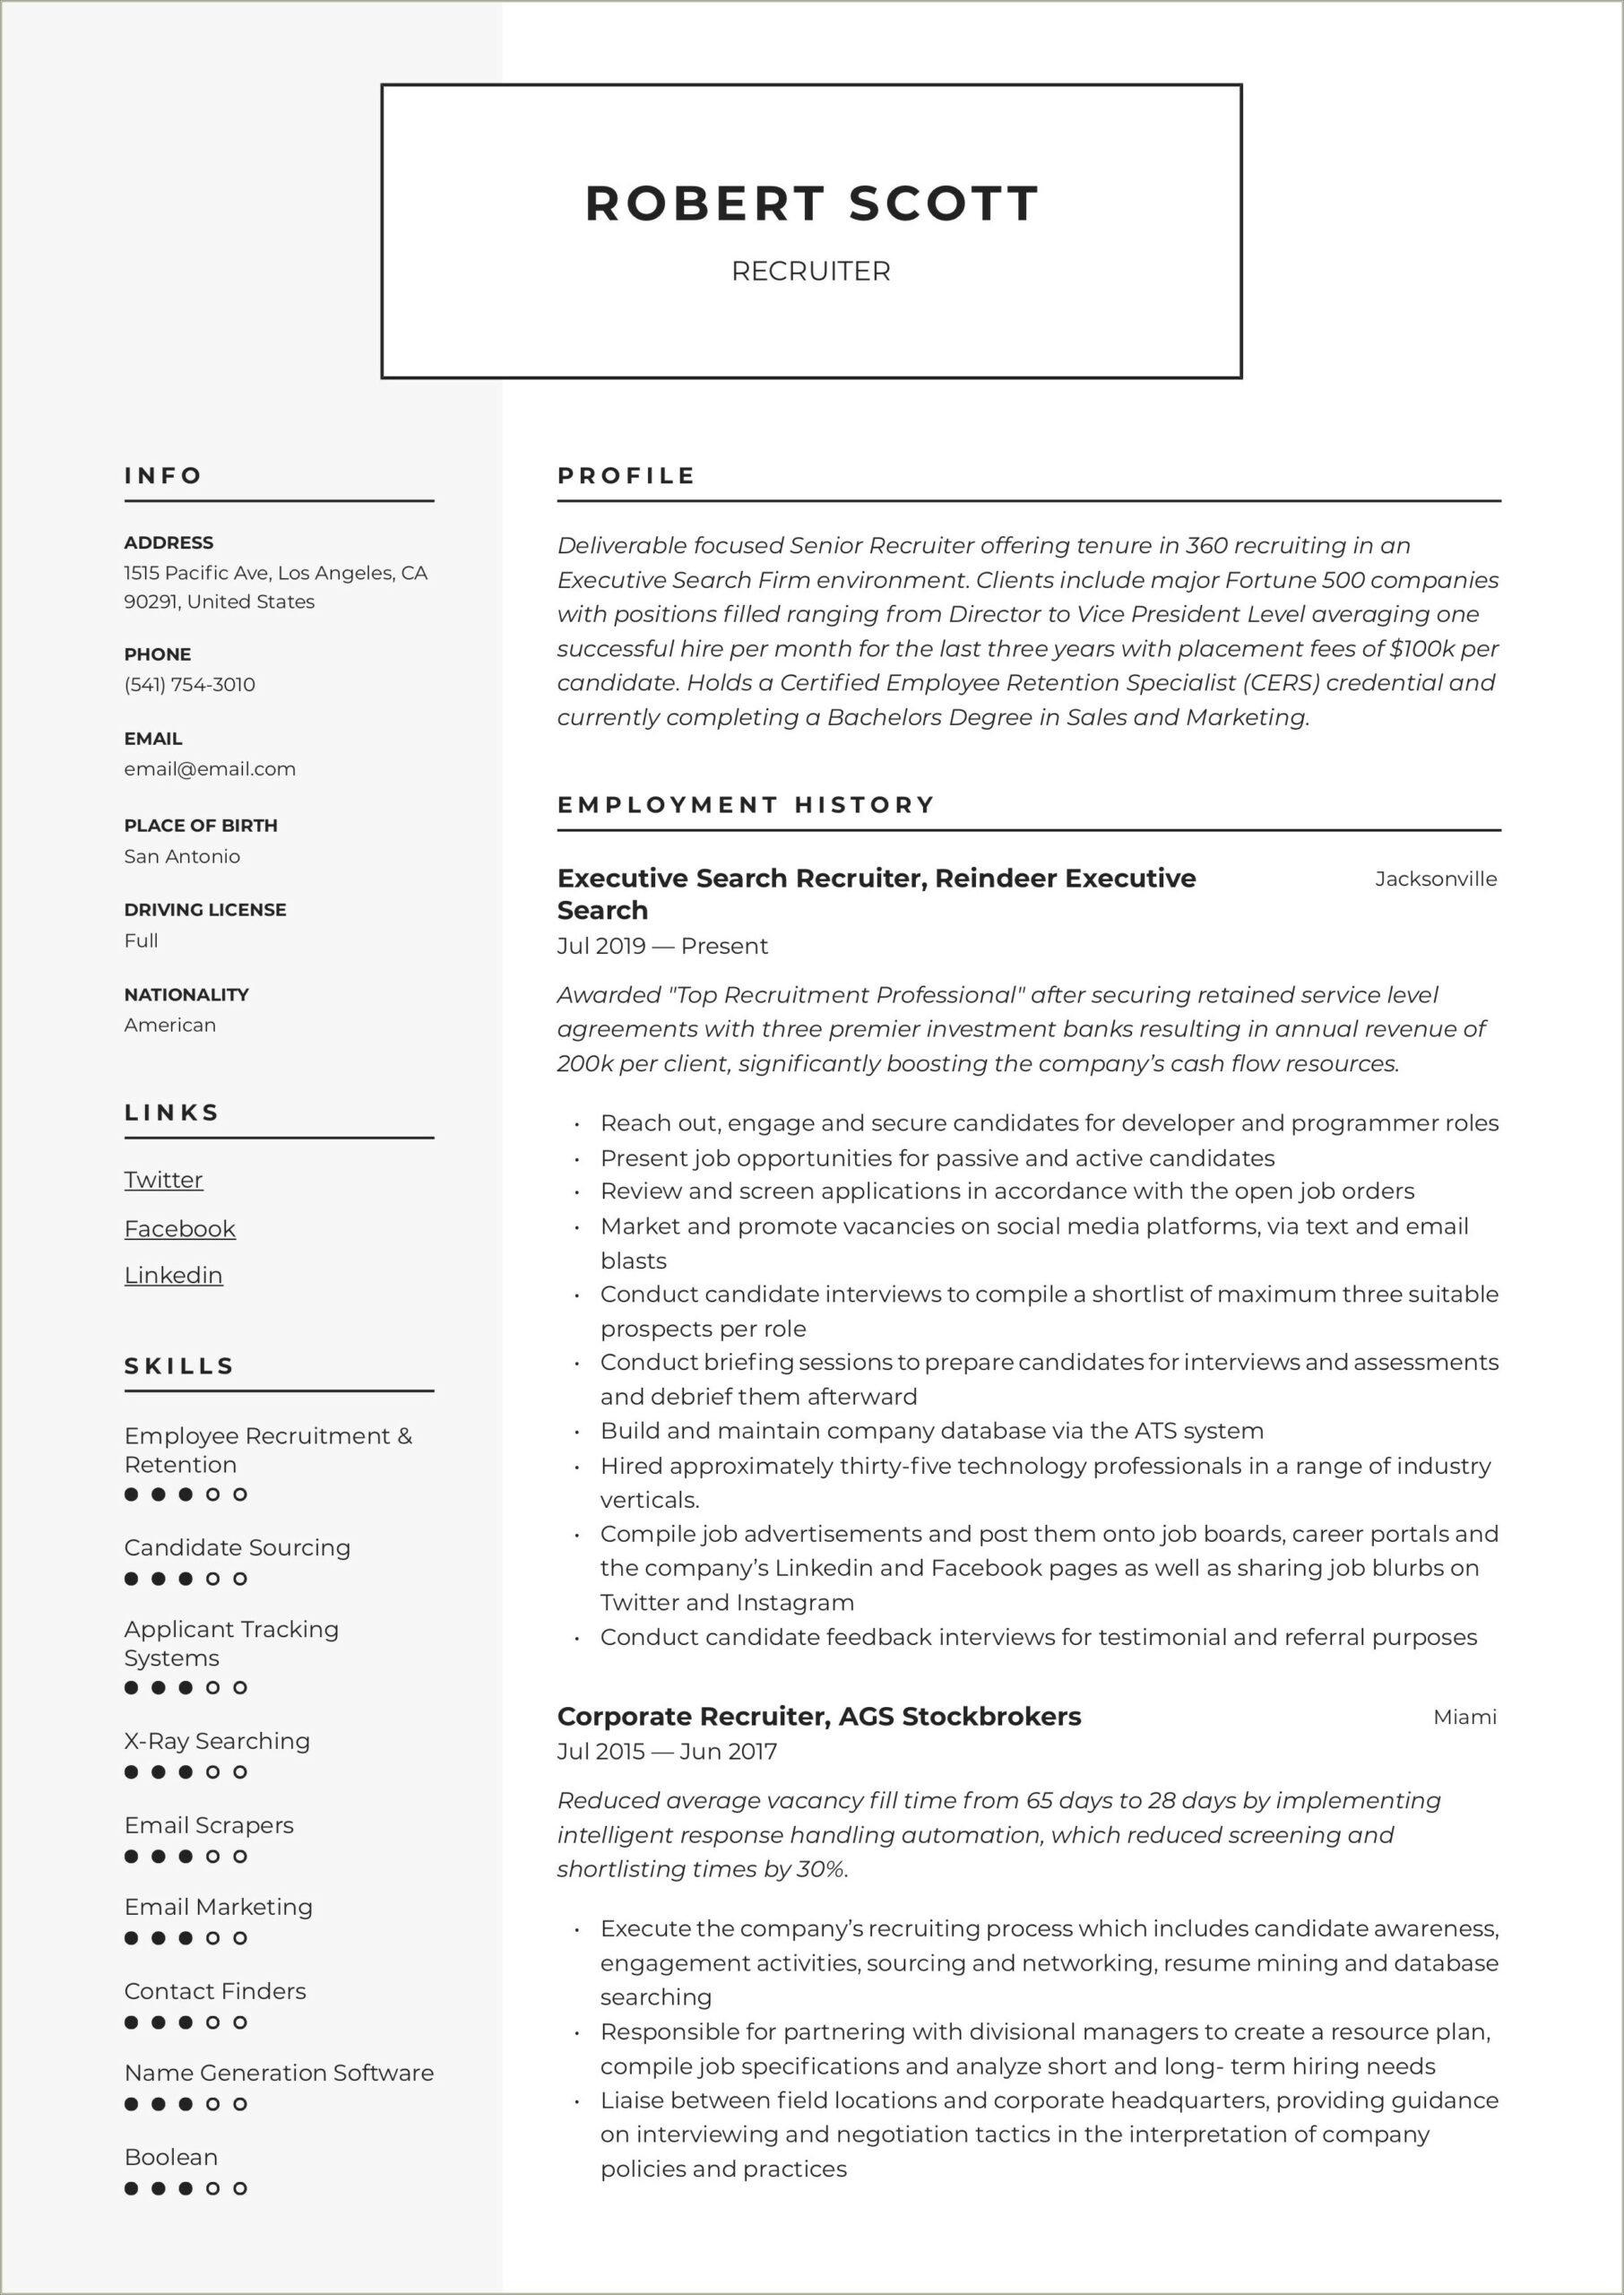 Sample Resume For A Marketing Research Recruiter